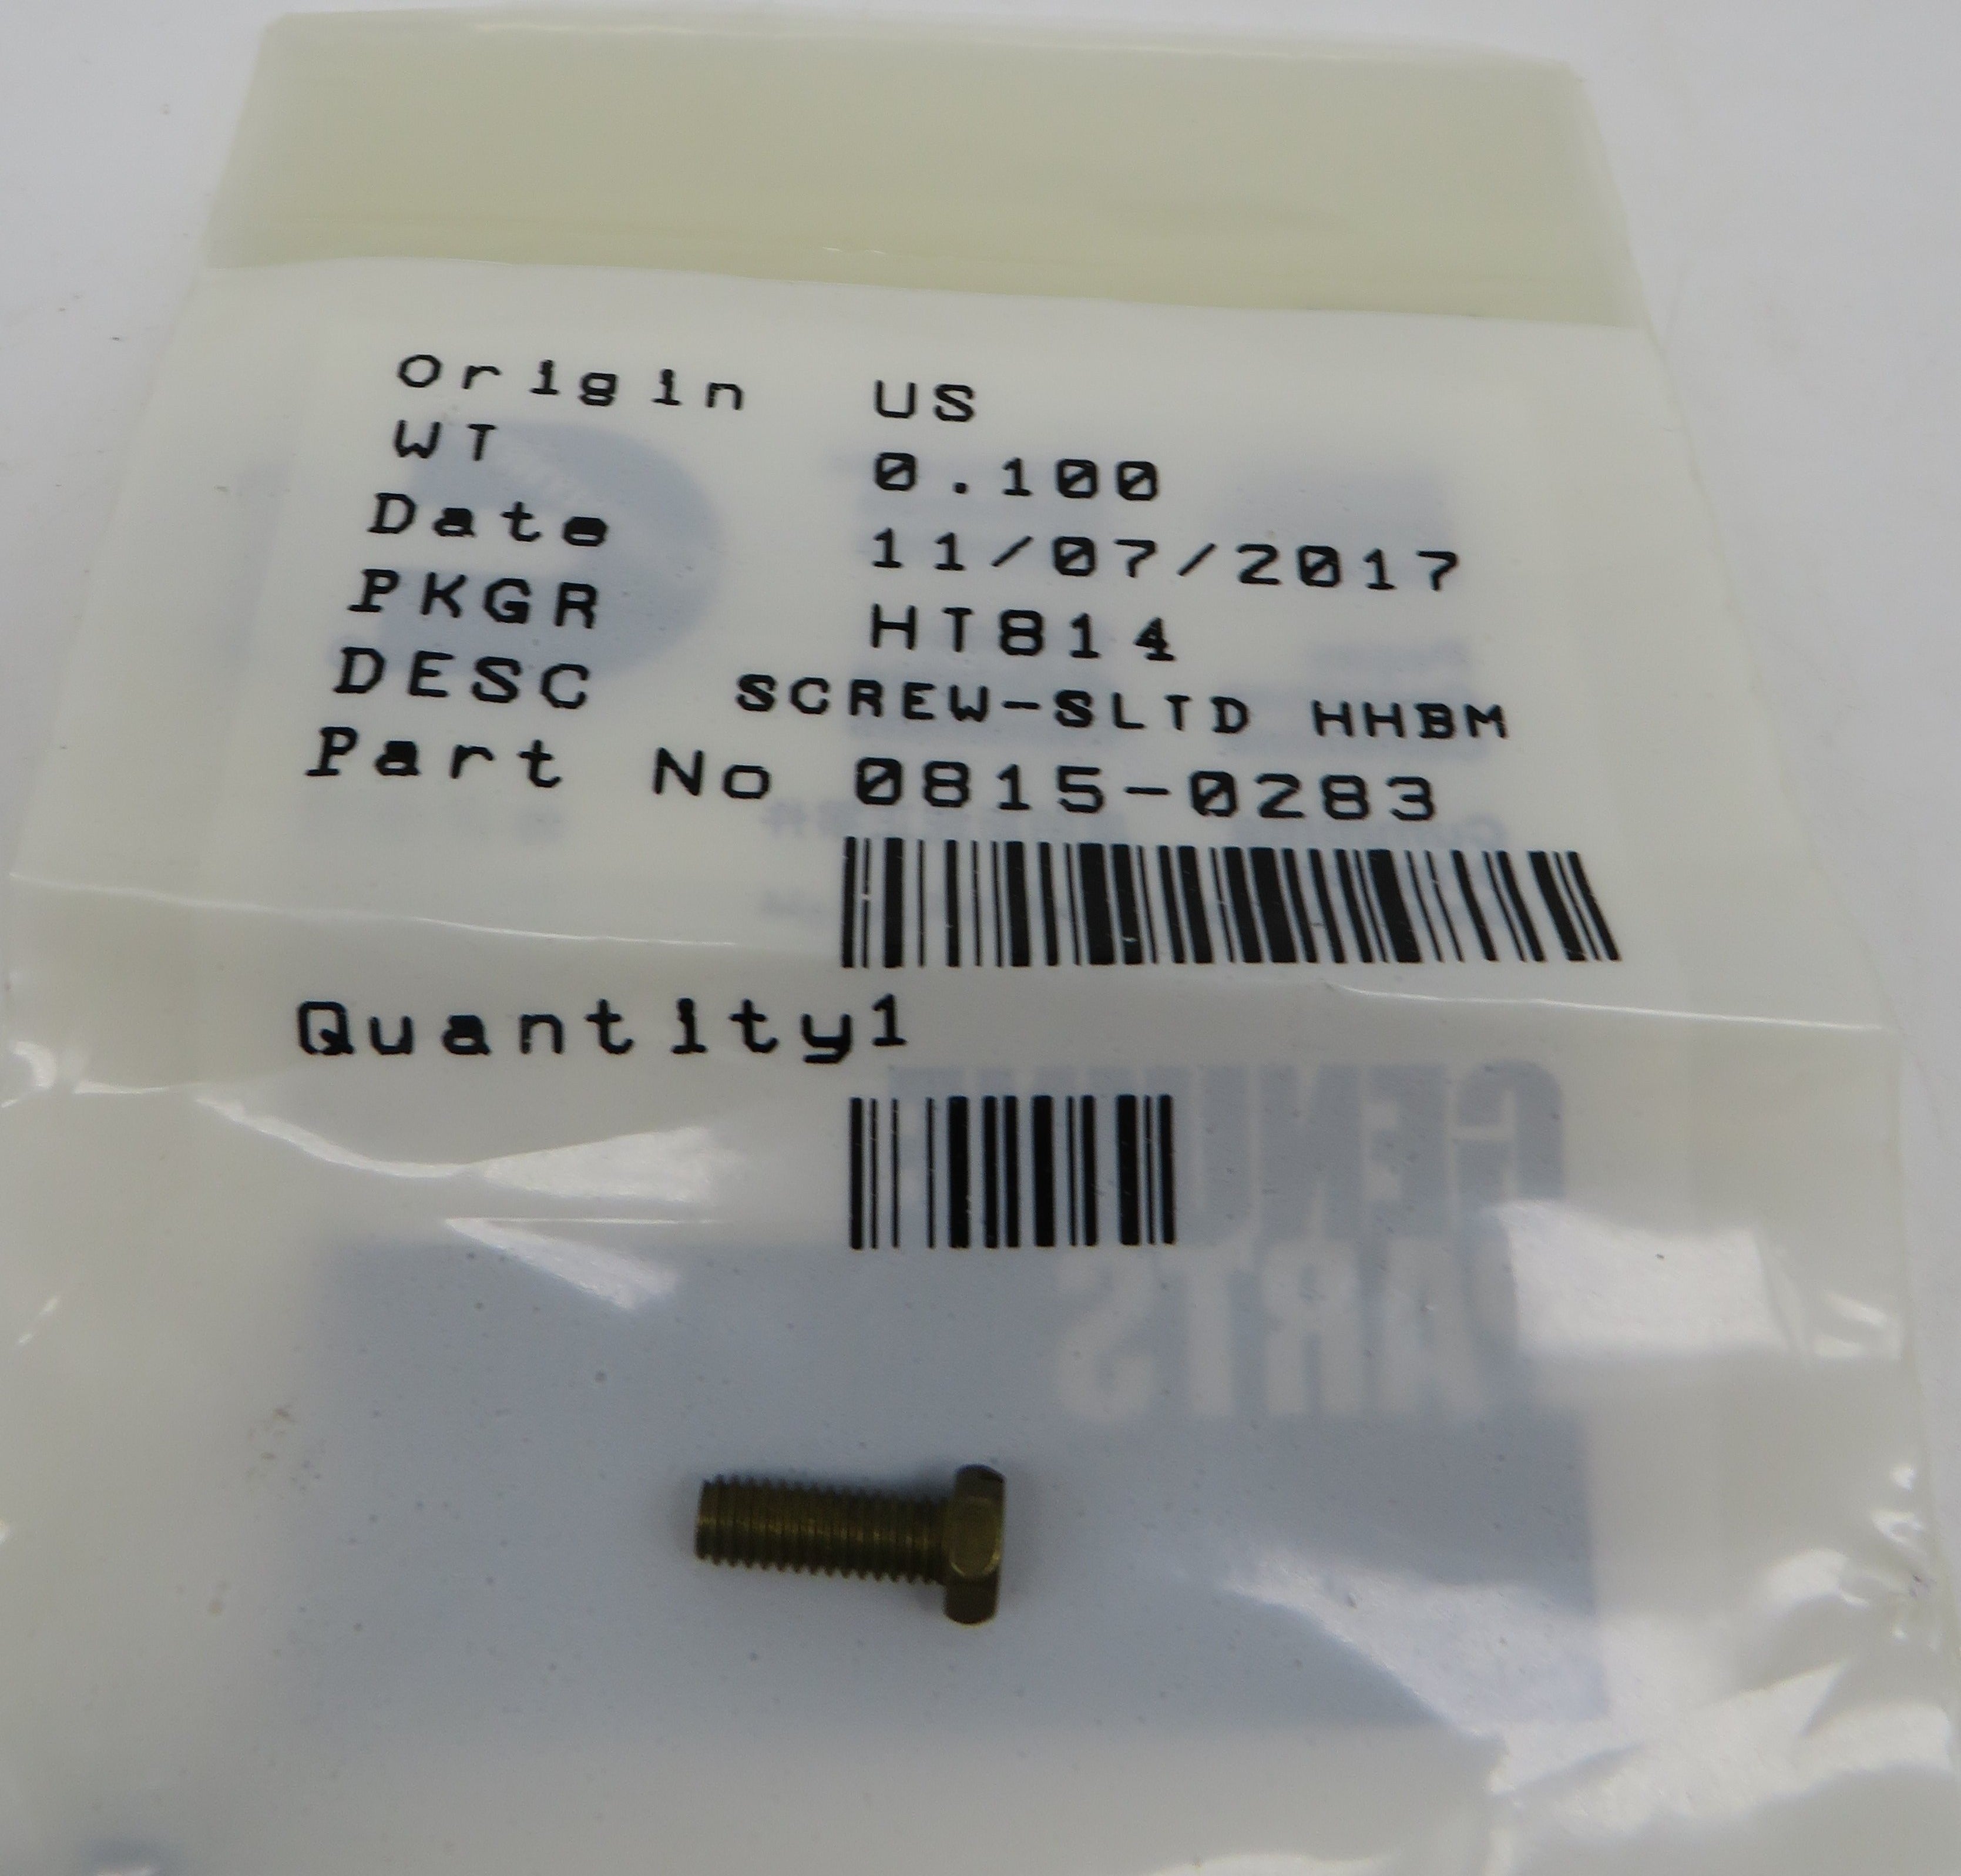 815-0283 Onan Screw-SLTD HHBM (Replacement For Kit 131-0179) 3/19/2024 THIS PART IS IN STOCK 3/19/2024